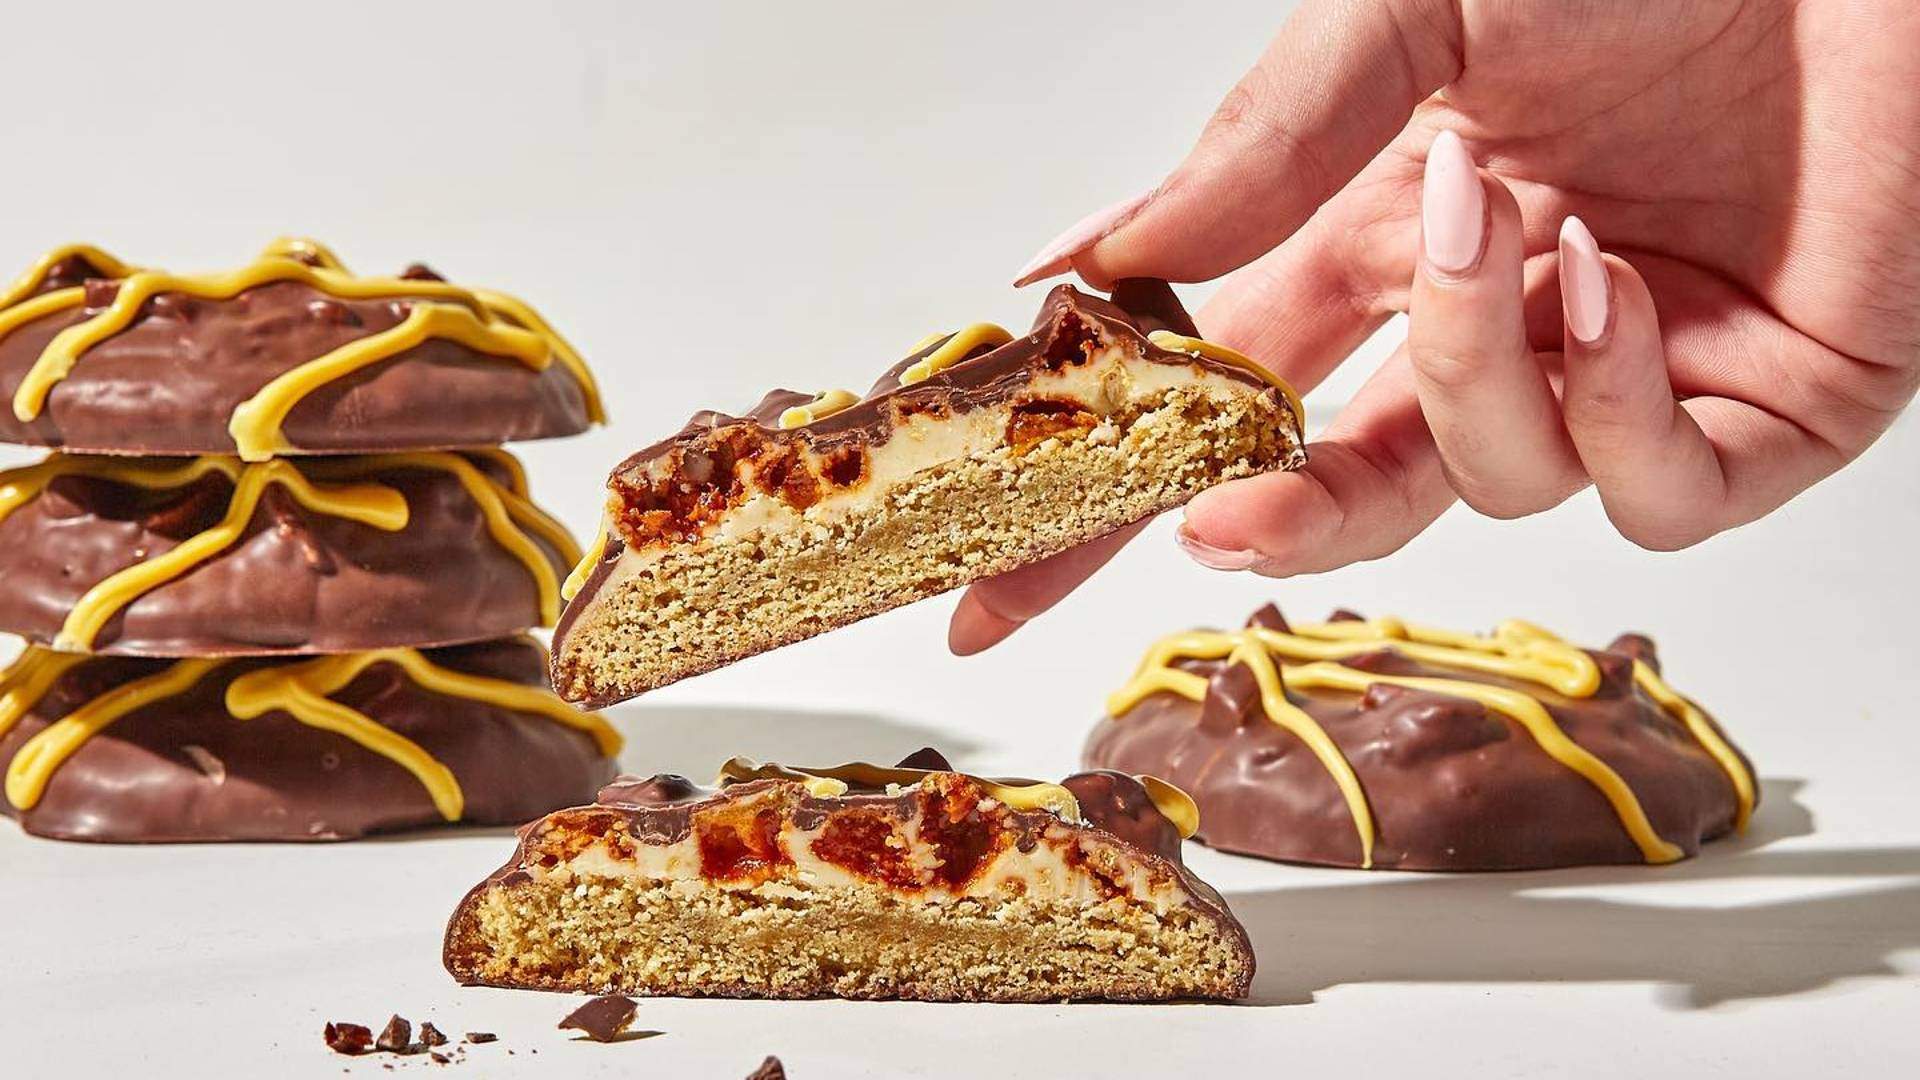 Moustache Has Made a Giant Squiggles Biscuit That's Giving Us All The Sugary Lunchbox Nostalgia